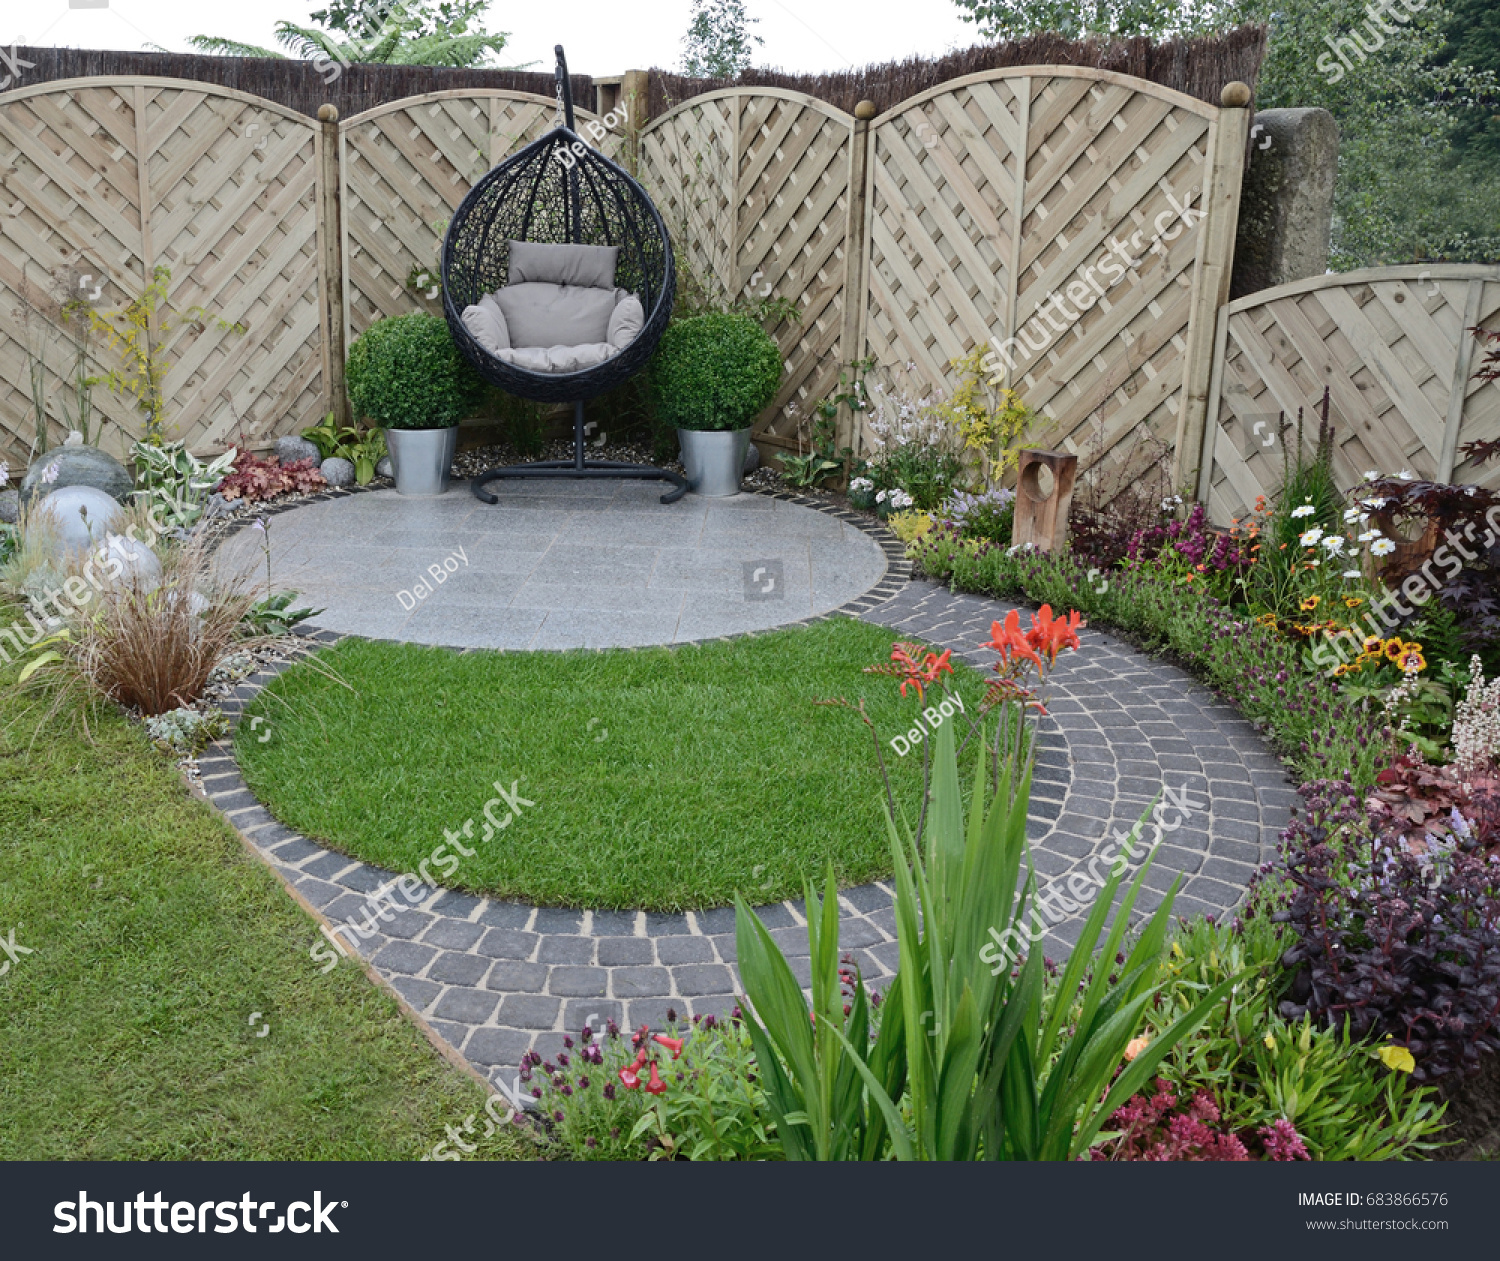 Garden Design Based On Flowing Curves Stock Photo (Edit Now) 683866576